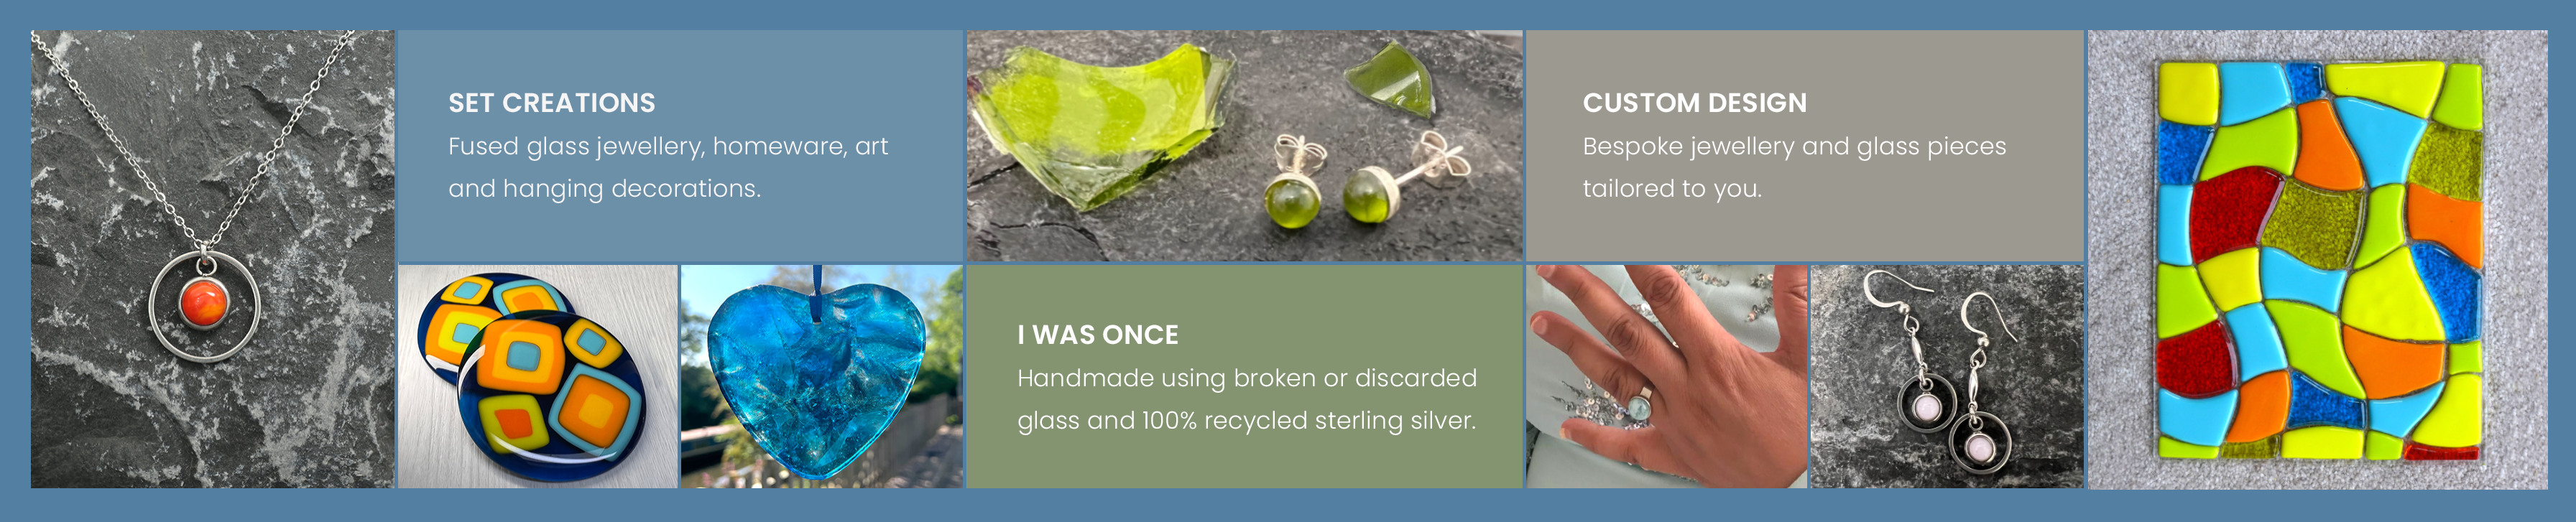 Web banner showing fused glass selection, recycled glass jewellery sample and bespoke glass and jewellery samples